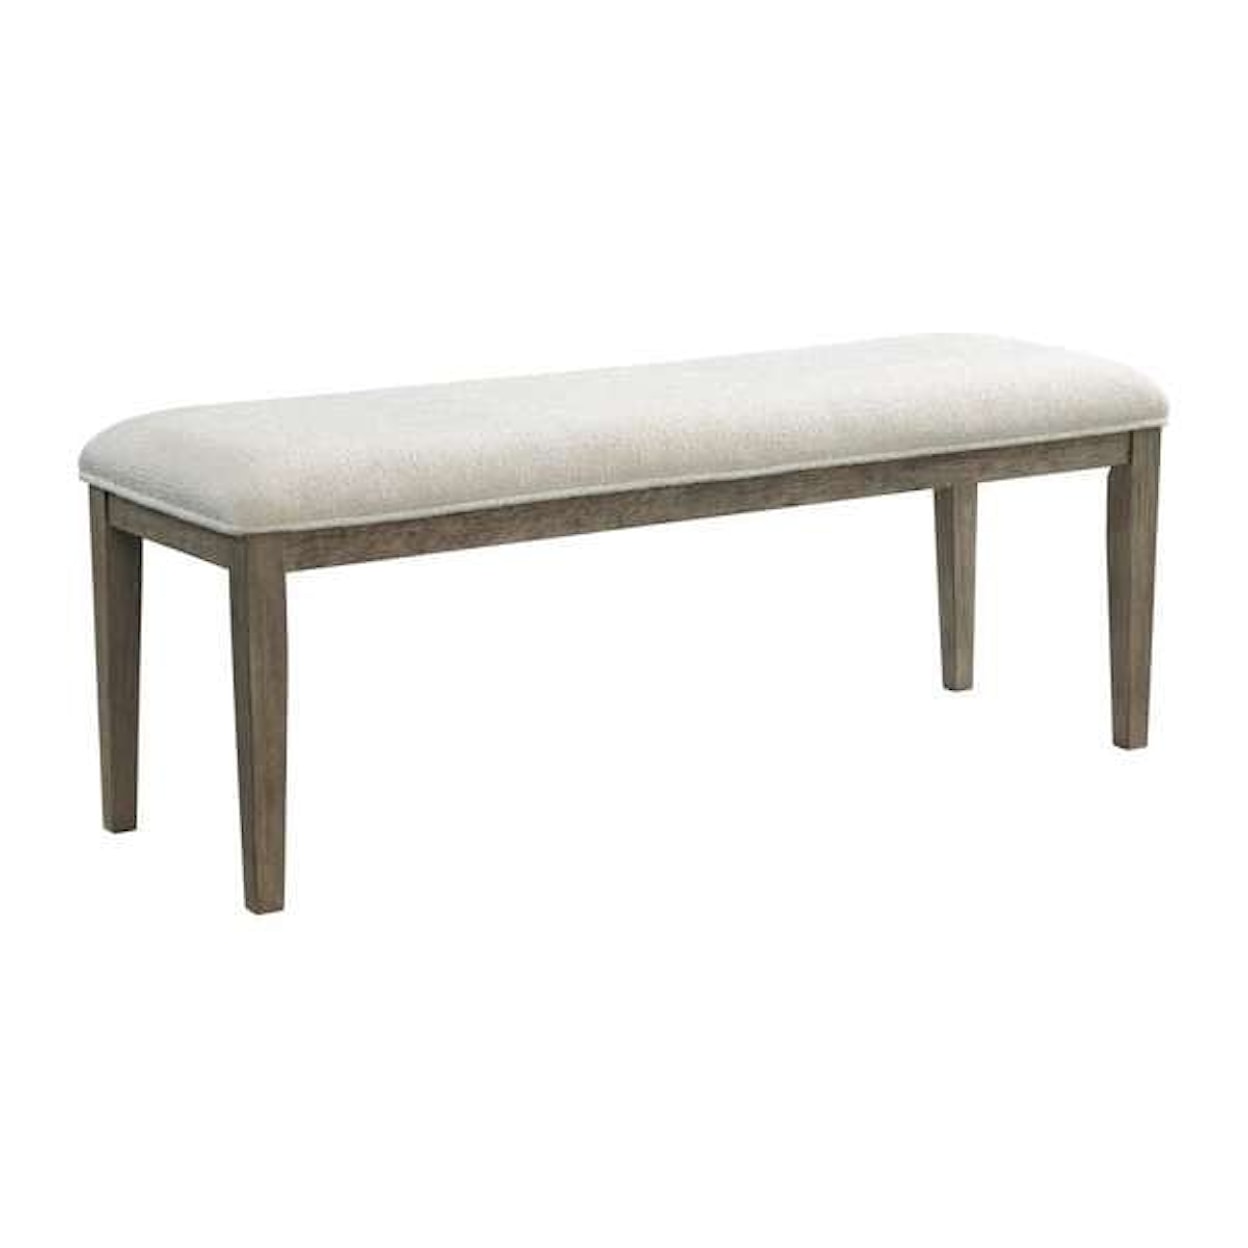 Elements International Versailles Contemporary Dining Bench